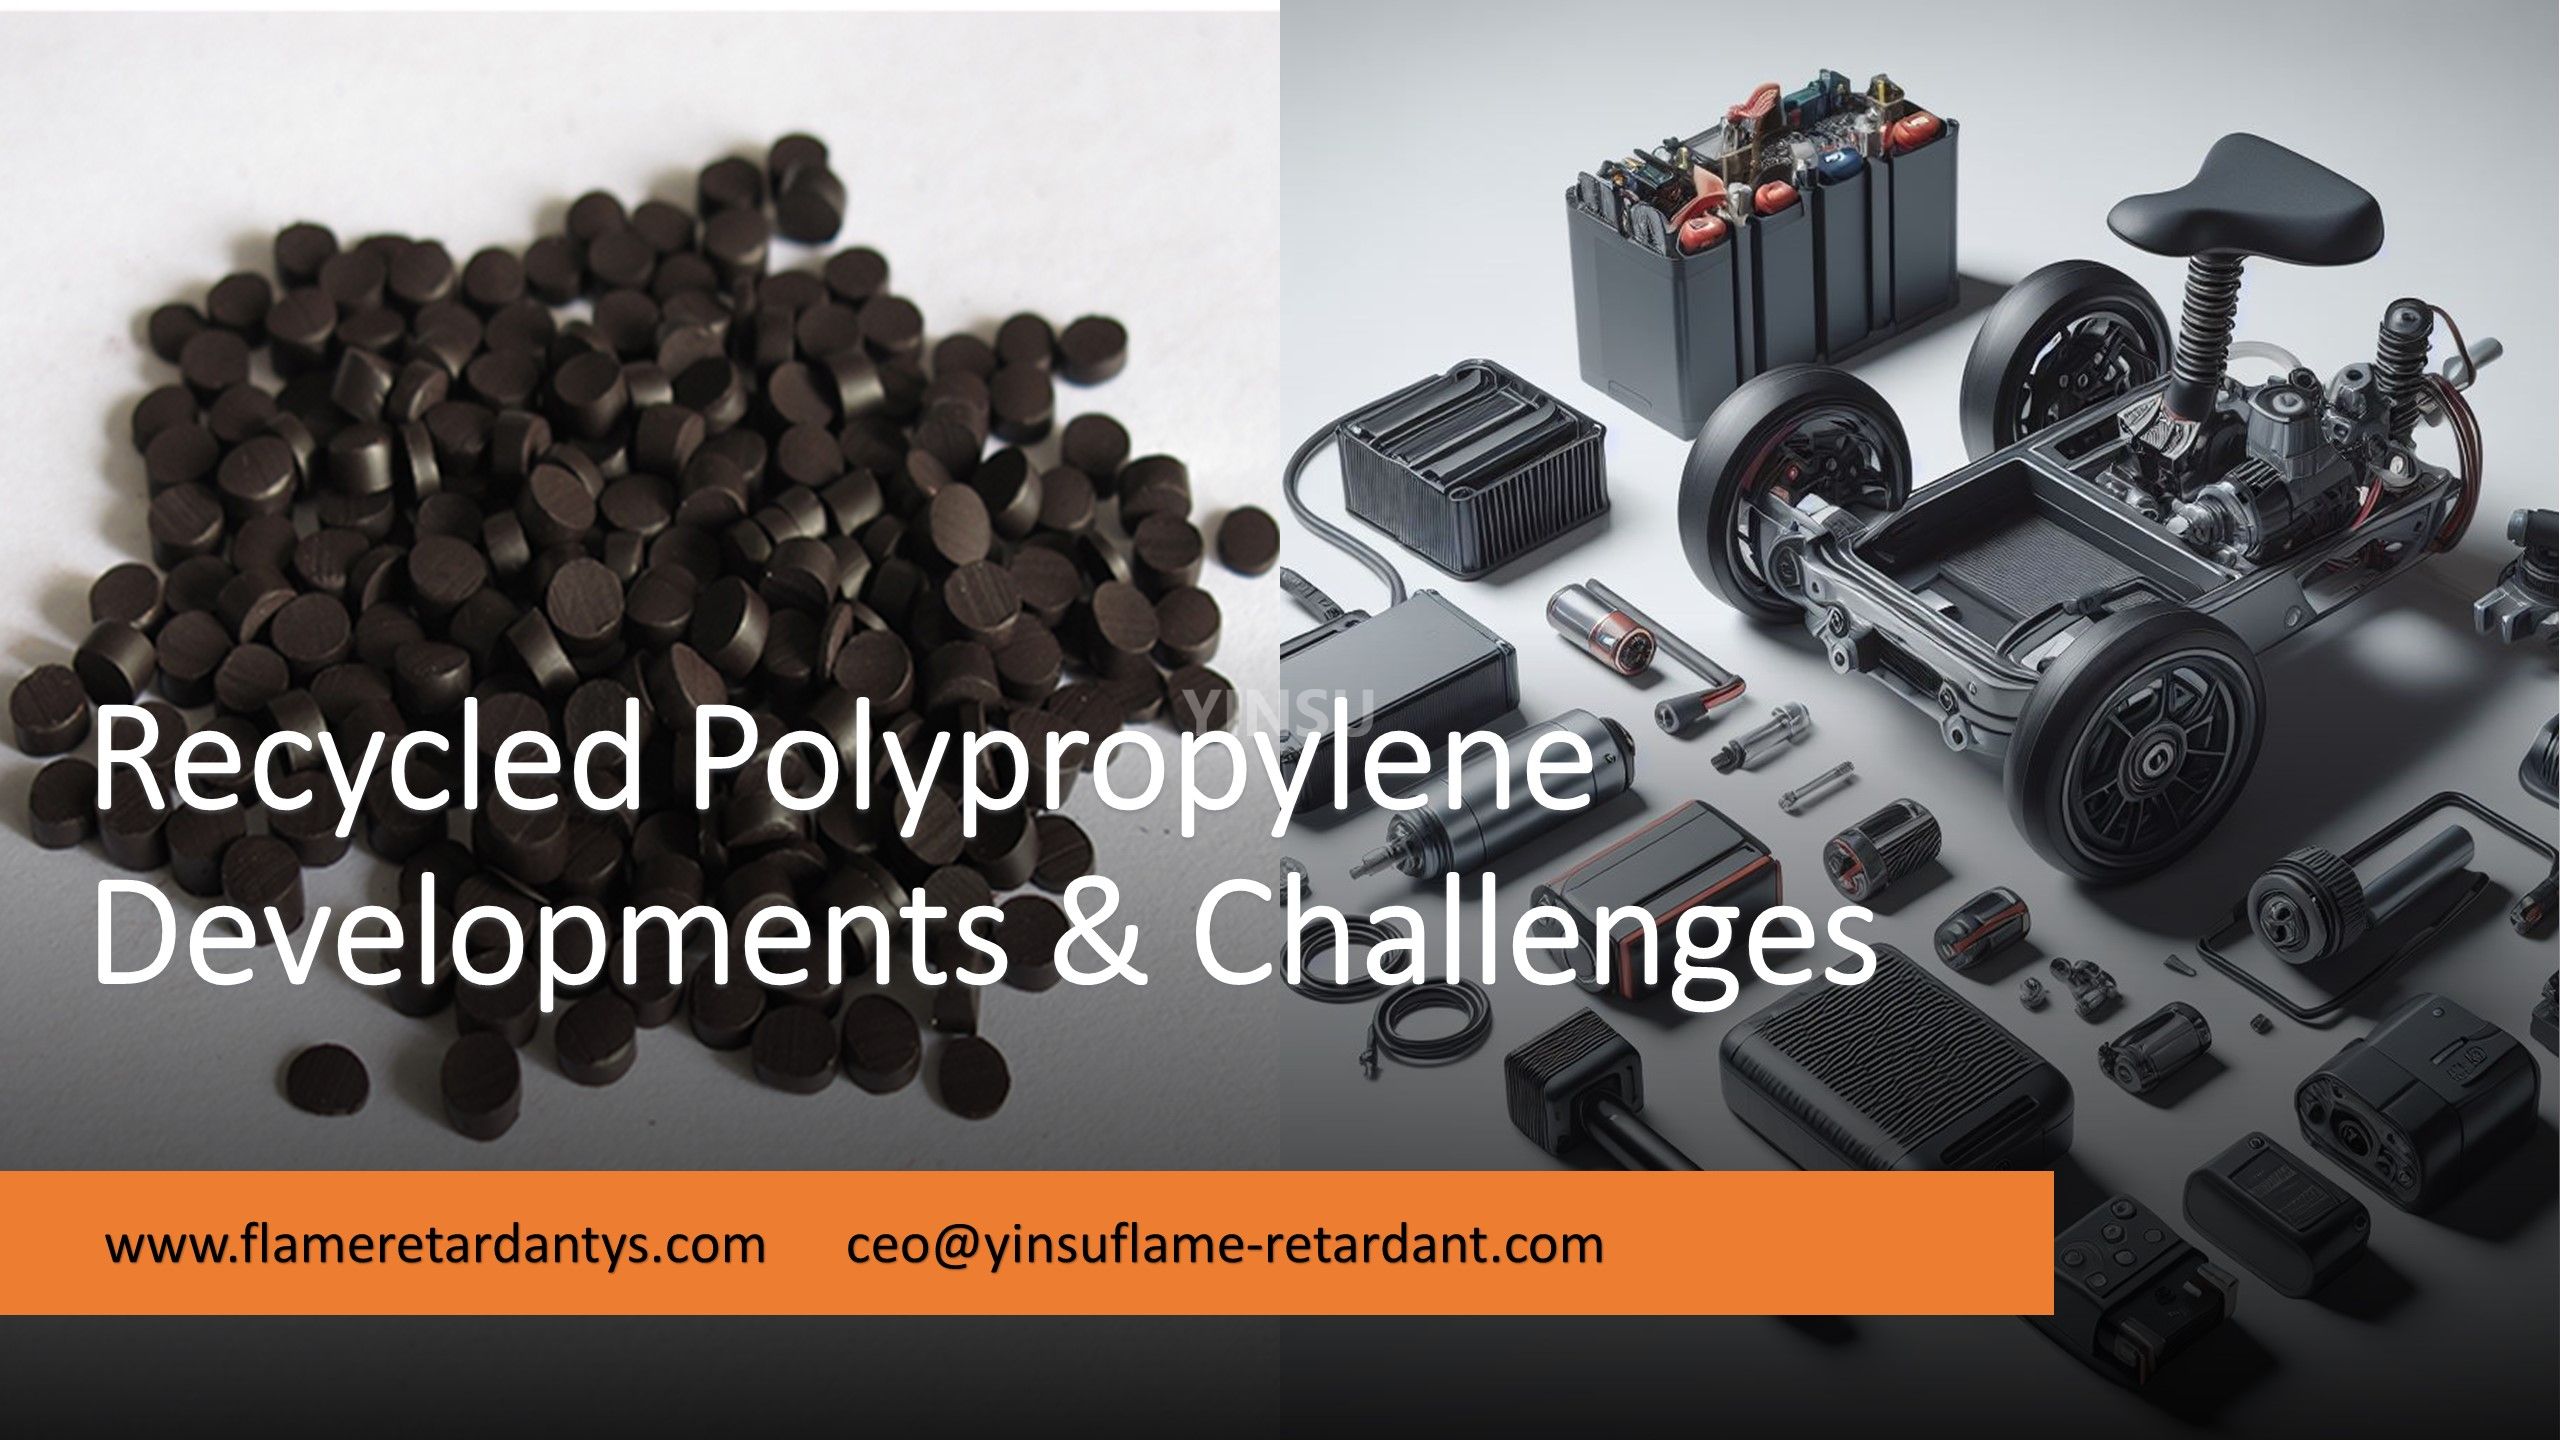 Recycled Polypropylene Developments & Challenges